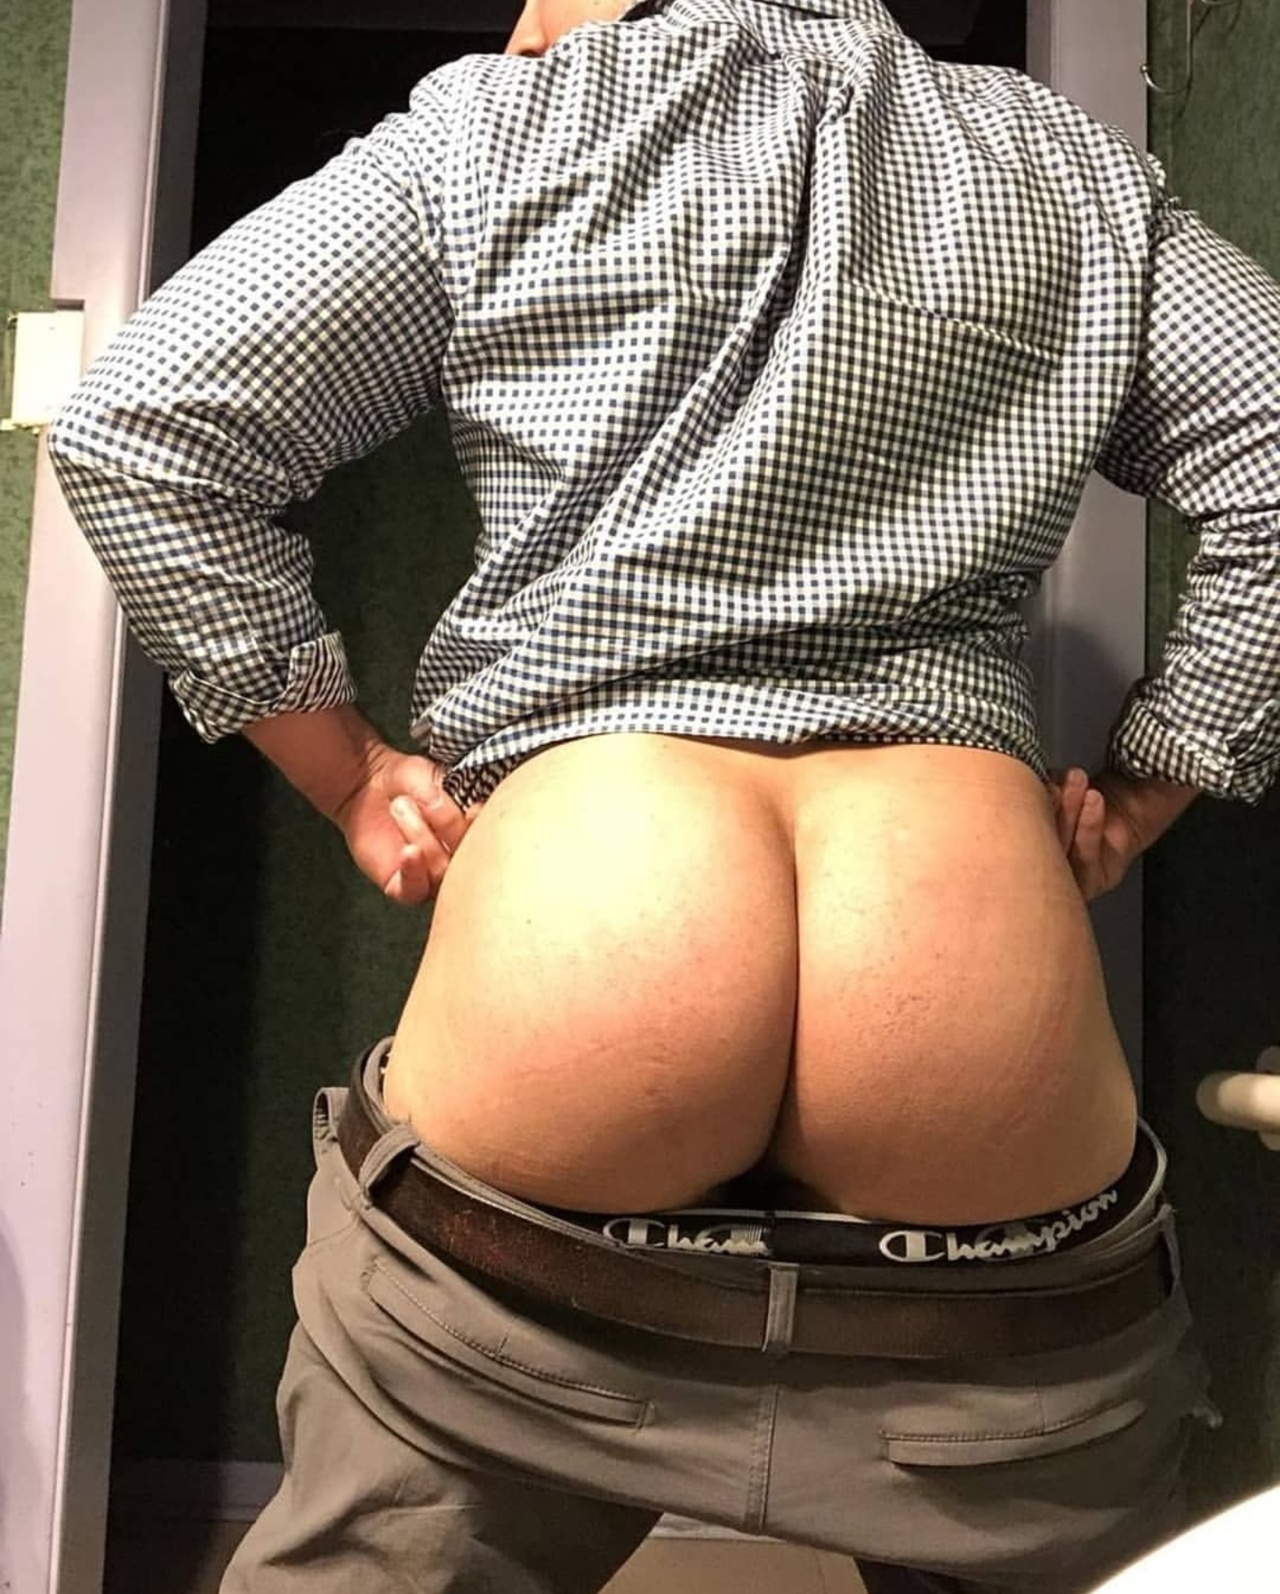 Beefy Butt Gay Porn - beefy butts â€” Ready to eat your face.